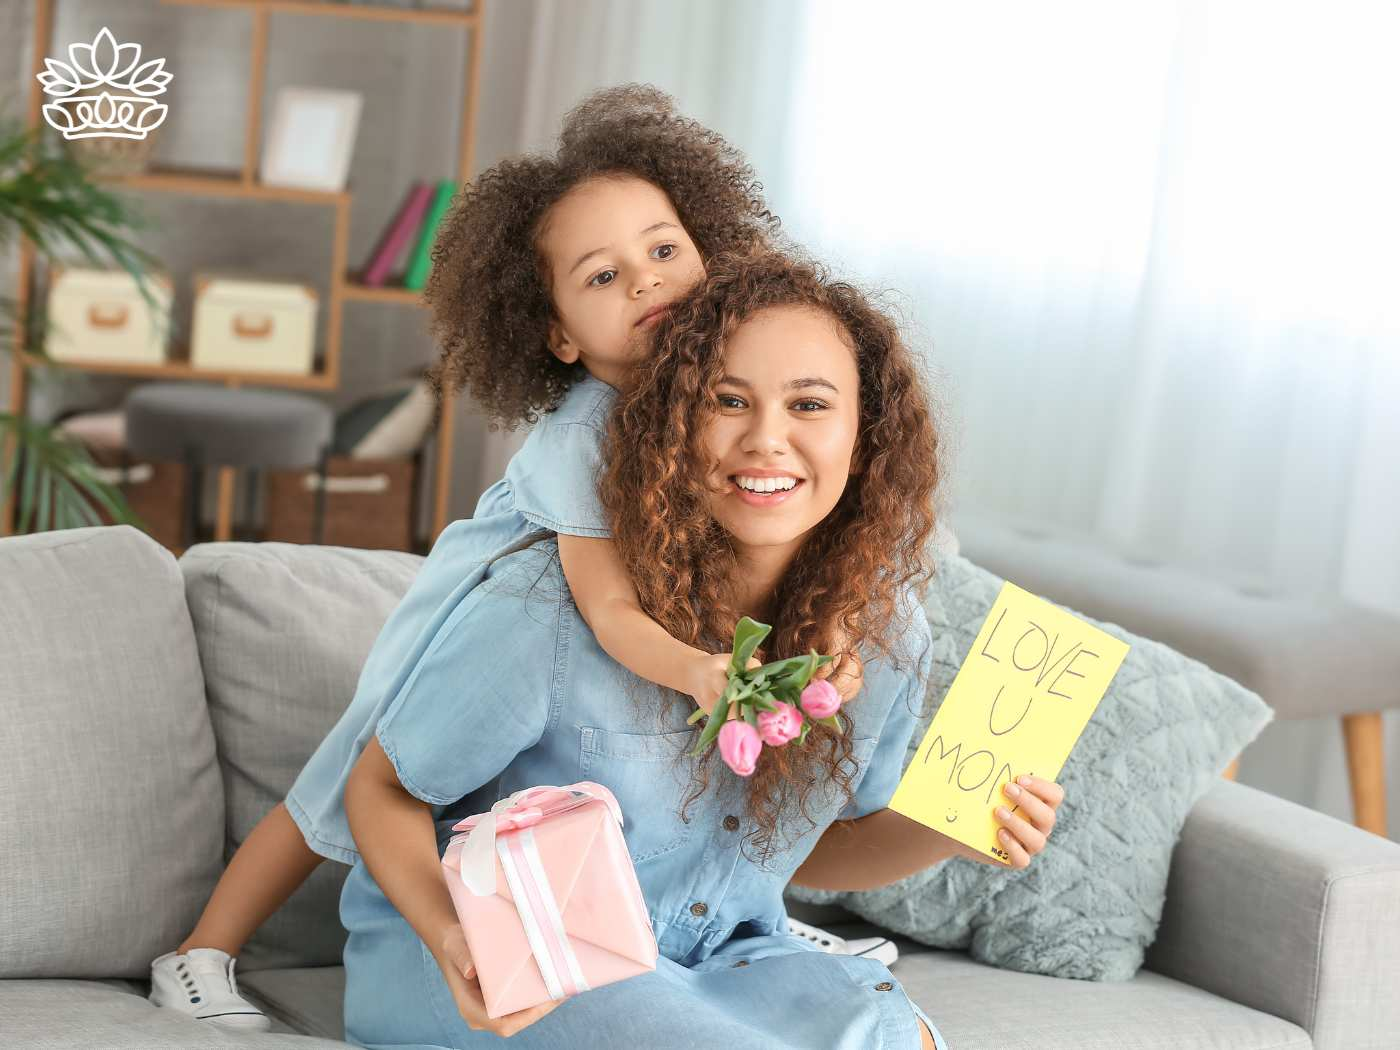 A mother joyfully holding a "Love U Mom" card, pink gift box, and tulips while embracing her daughter, representing the Gift Boxes for Her Collection - Fabulous Flowers and Gifts